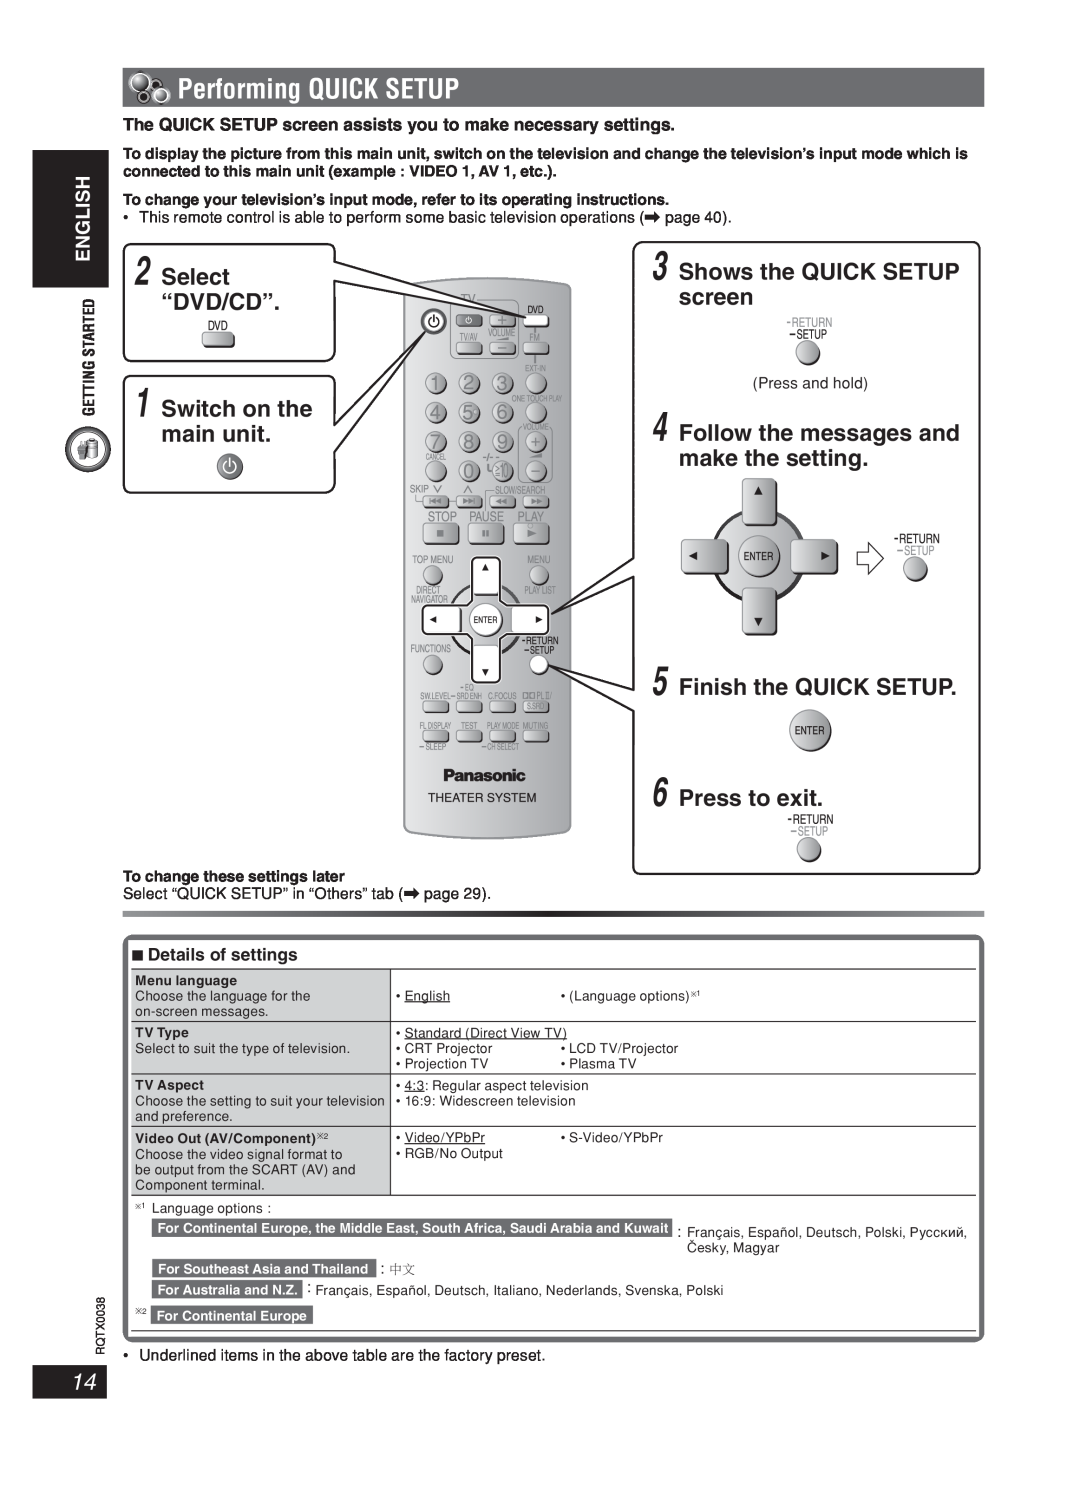 Panasonic SC-PT850 manual Performing QUICK SETUP, Select “DVD/CD” 1 Switch on the main unit, Shows the QUICK SETUP screen 